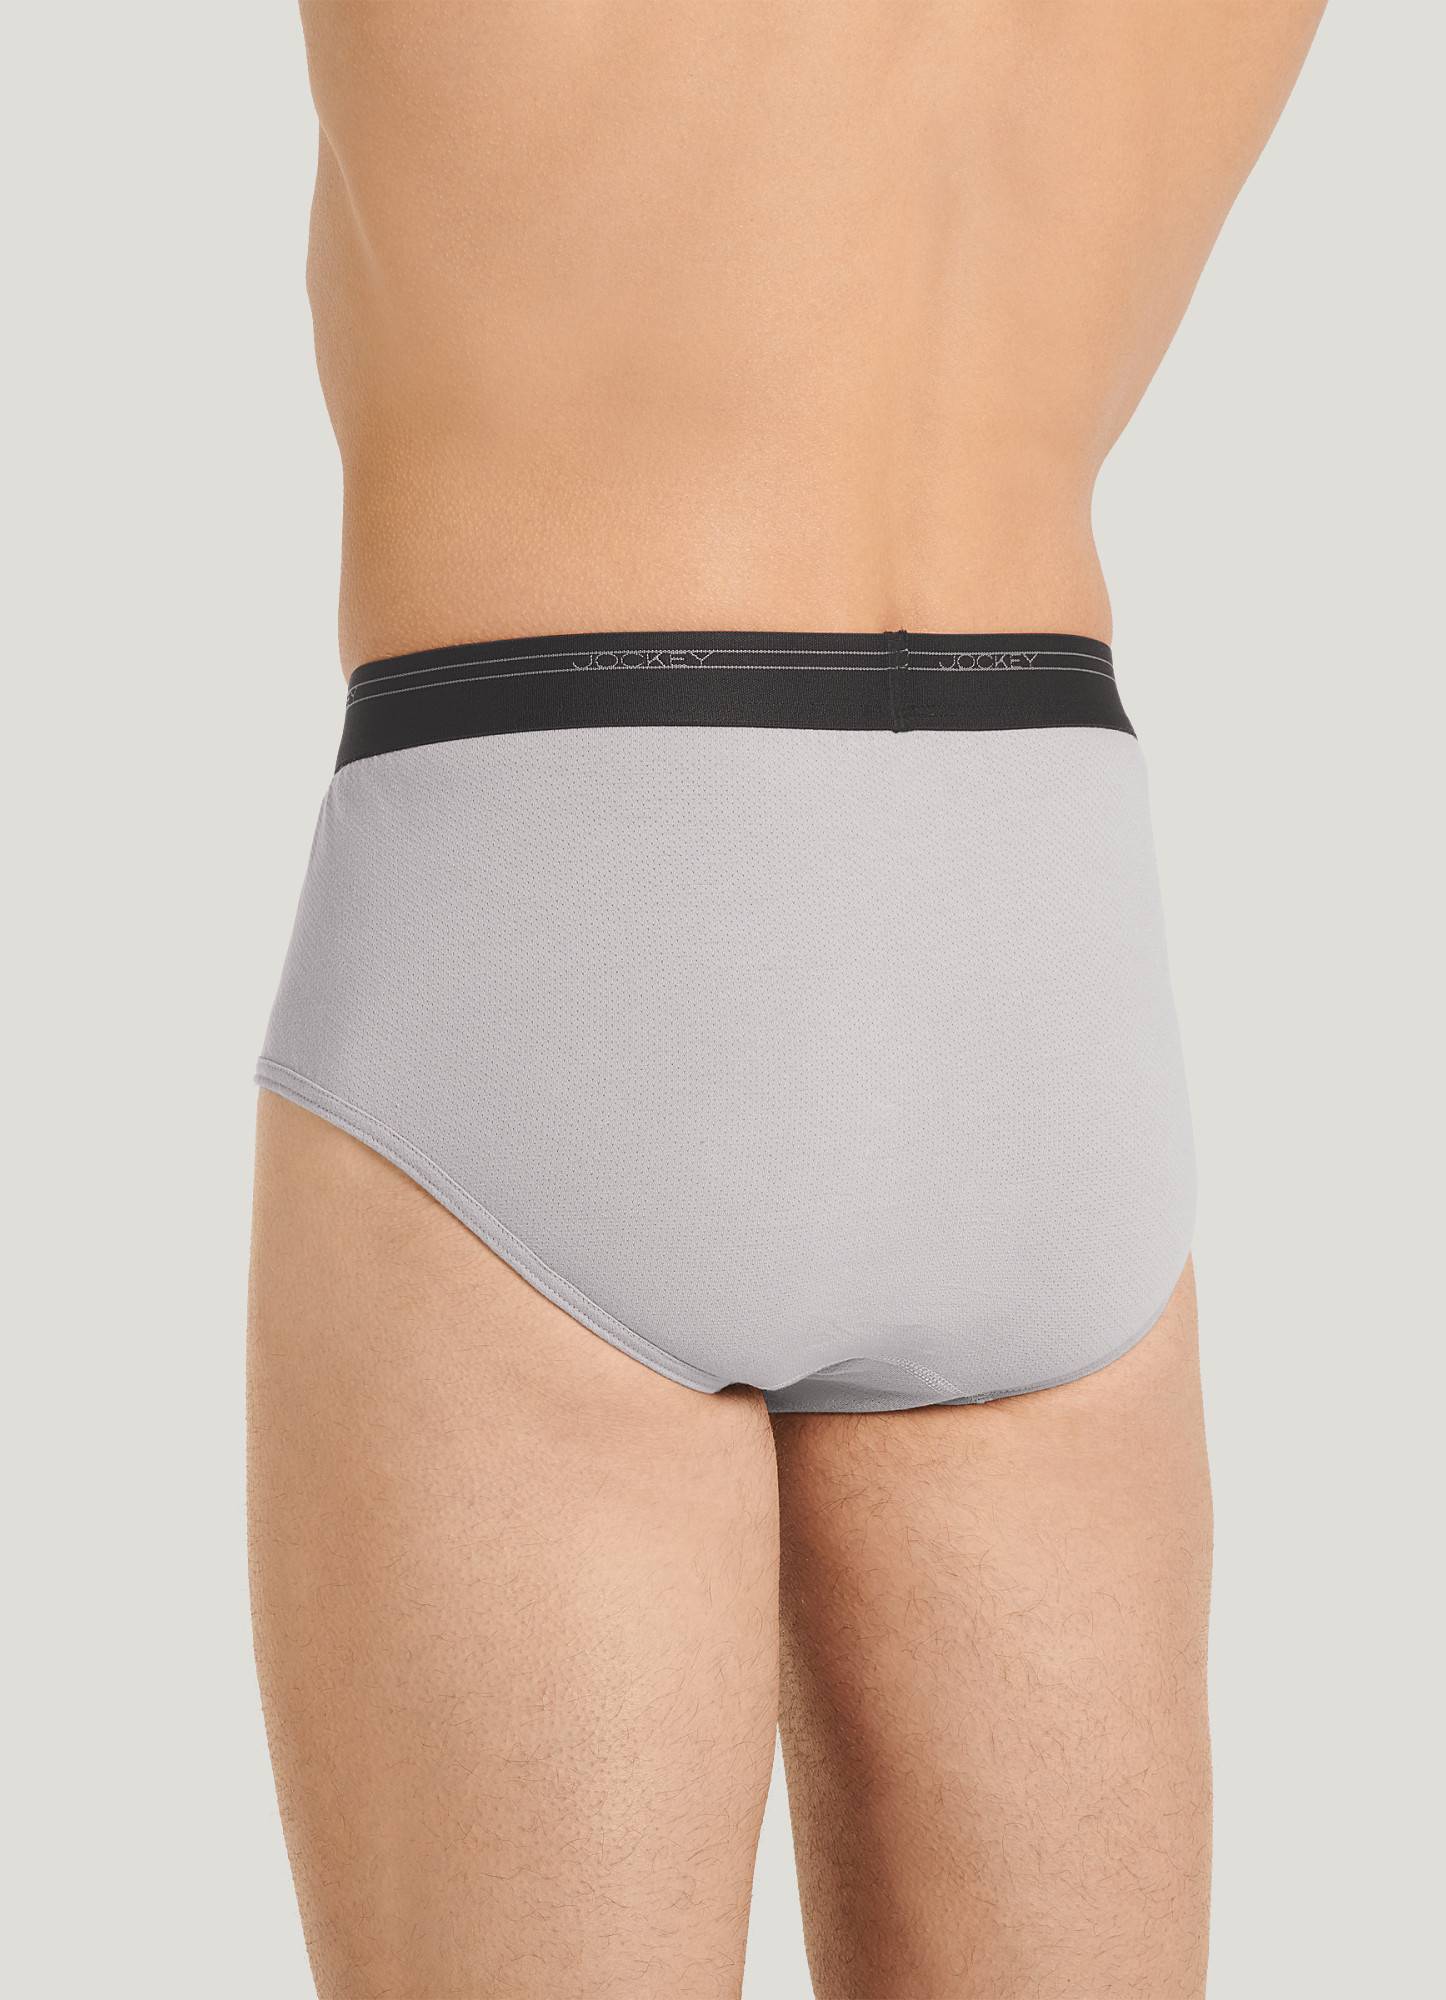 Pack of 4 pairs of cotton hipster briefs - Classic Briefs - Briefs